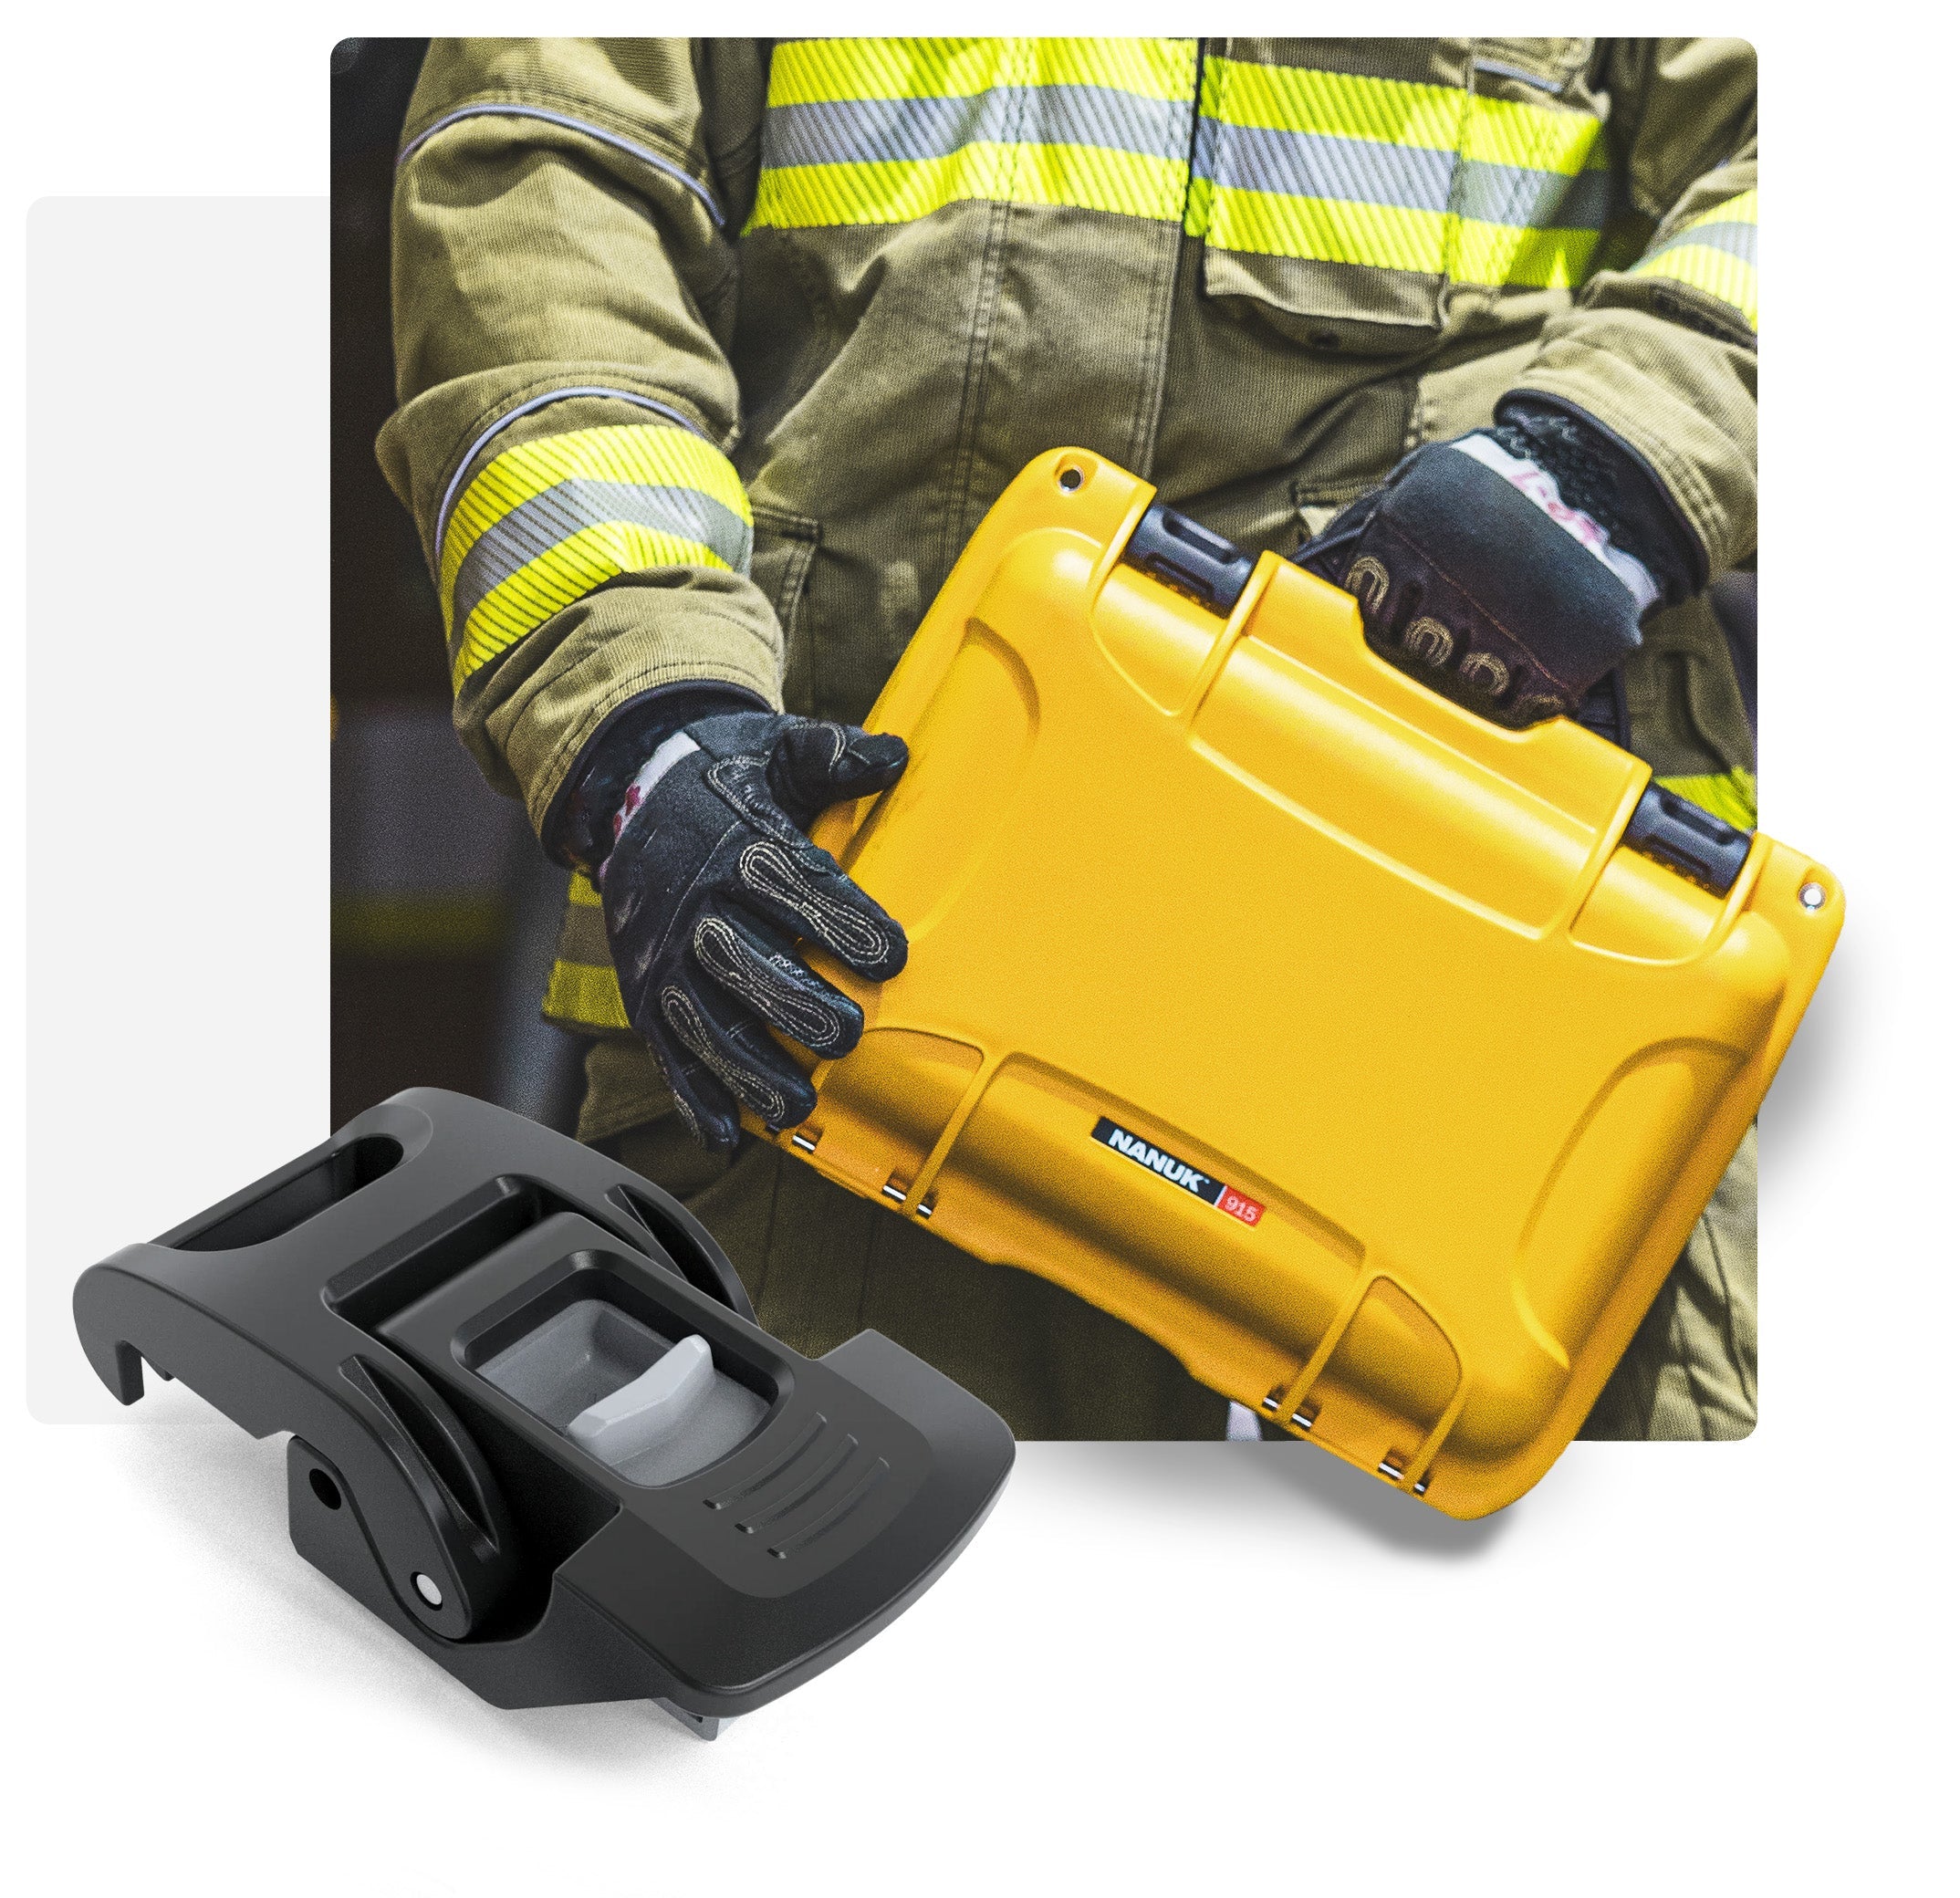 Nanuk hard cases feature easy-to-use latches and ergonomic designs, enabling workers to quickly access their tools, even when wearing gloves, without struggling or wasting time.